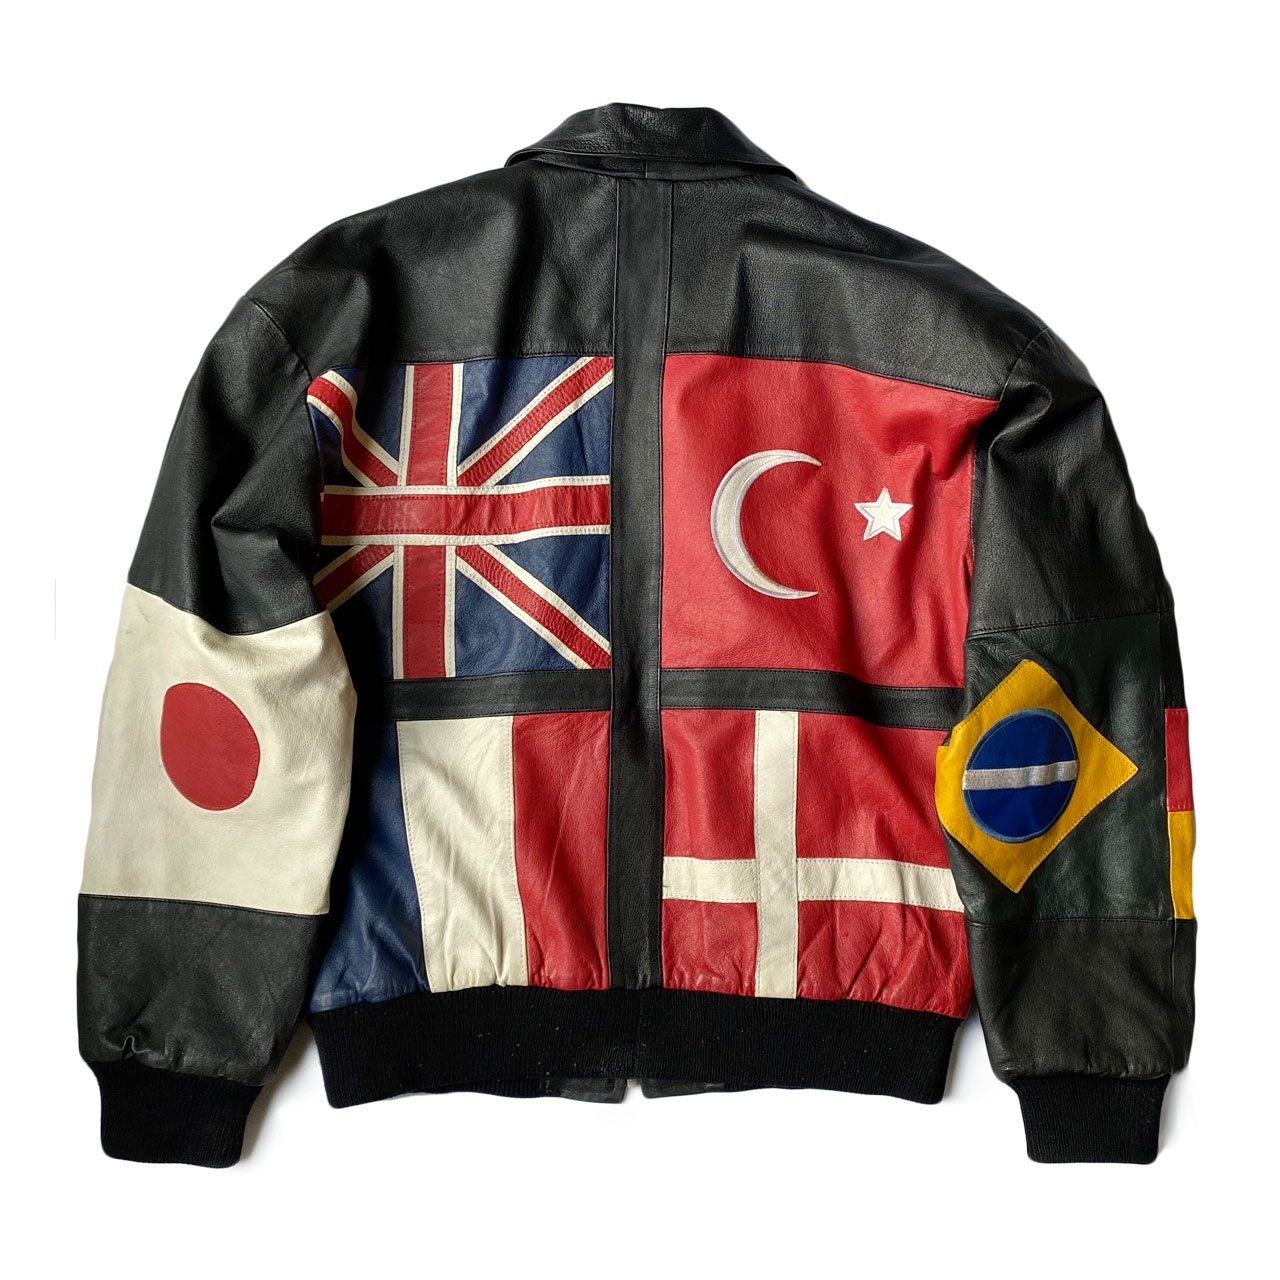 80's Phase 2 Flags of the World Leather Jacket - A2 Jackets